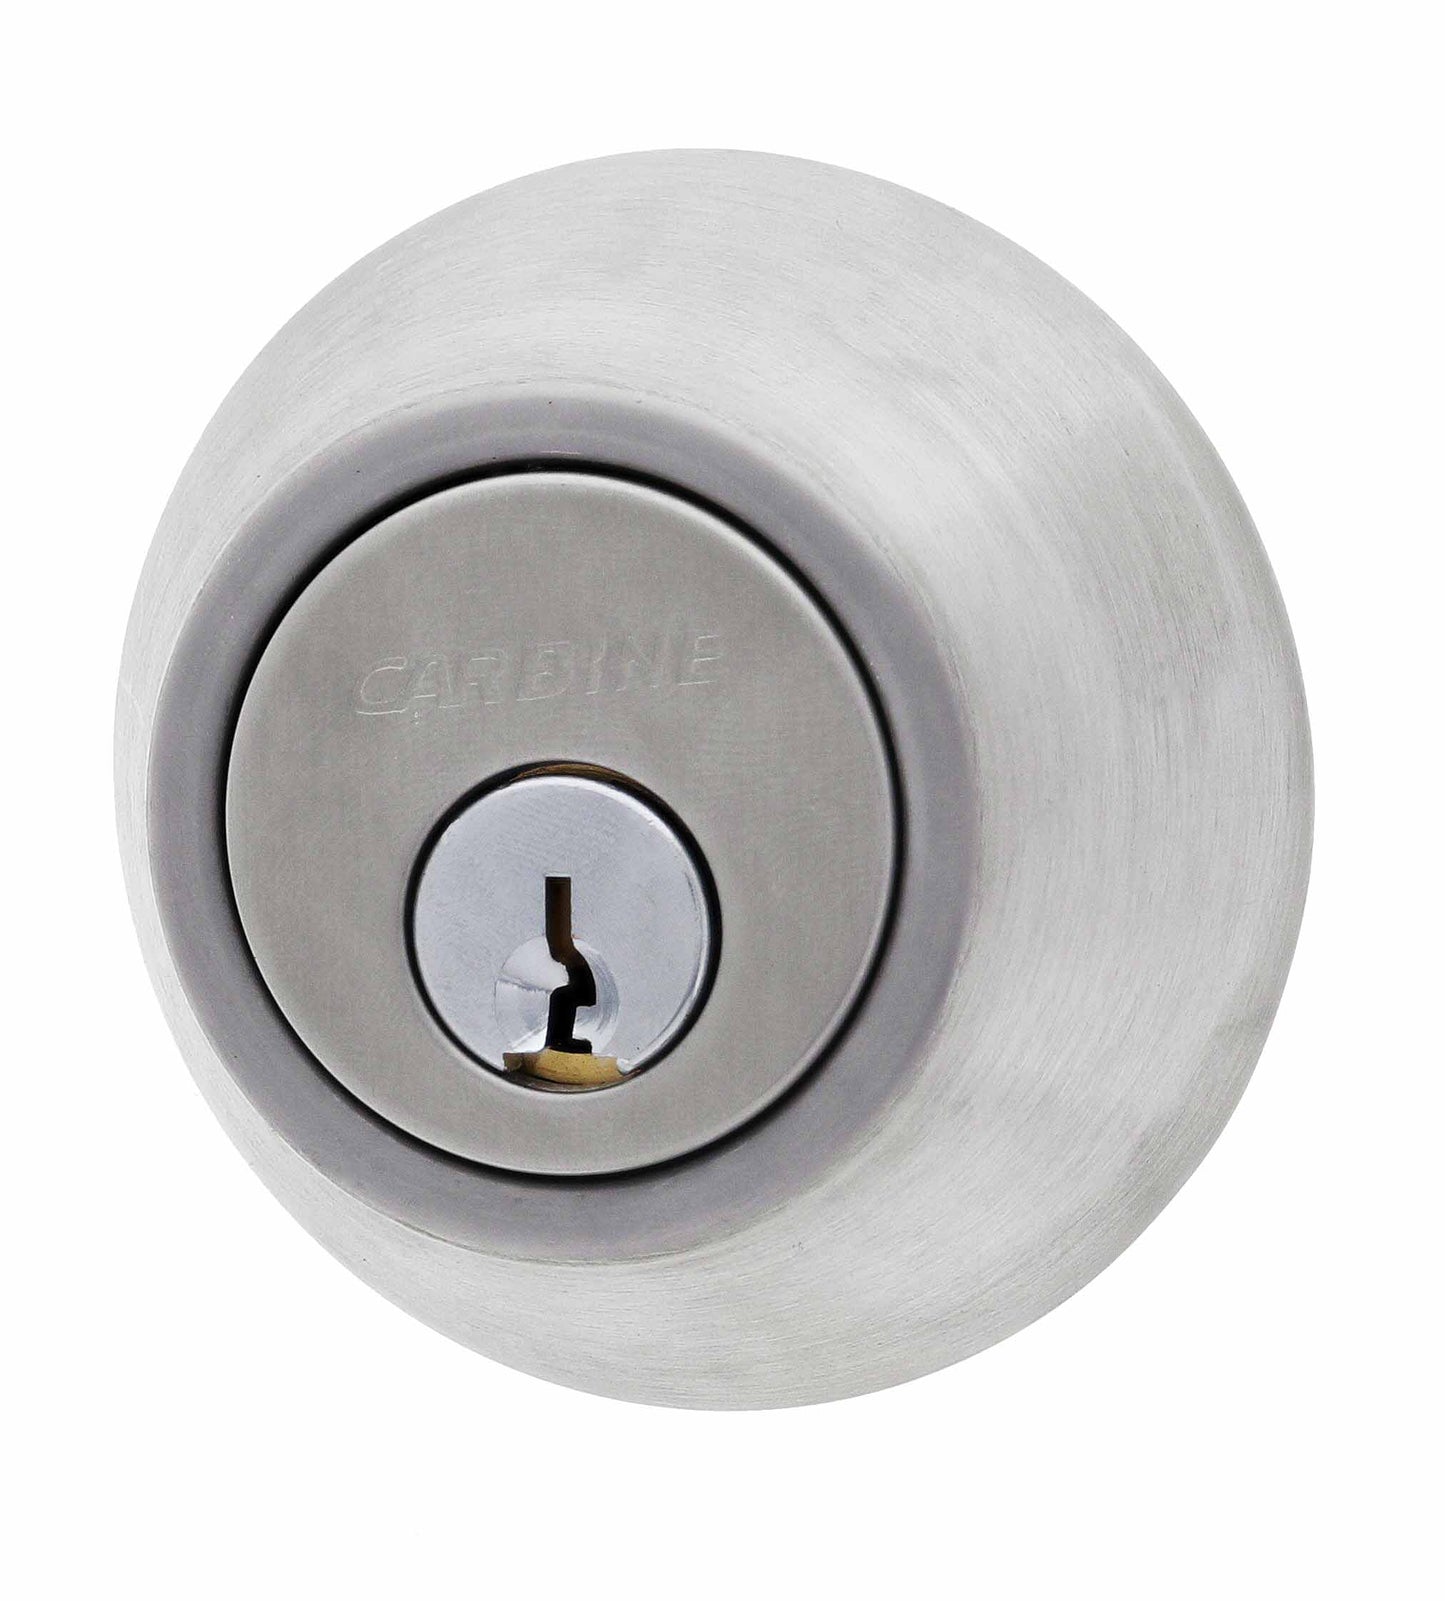 Carbine LB Residential Series Standard Double Cylinder Deadbolt, 60-70mm backset, C4 Keyed to Differ , Boxed, Satin Stainless Steel